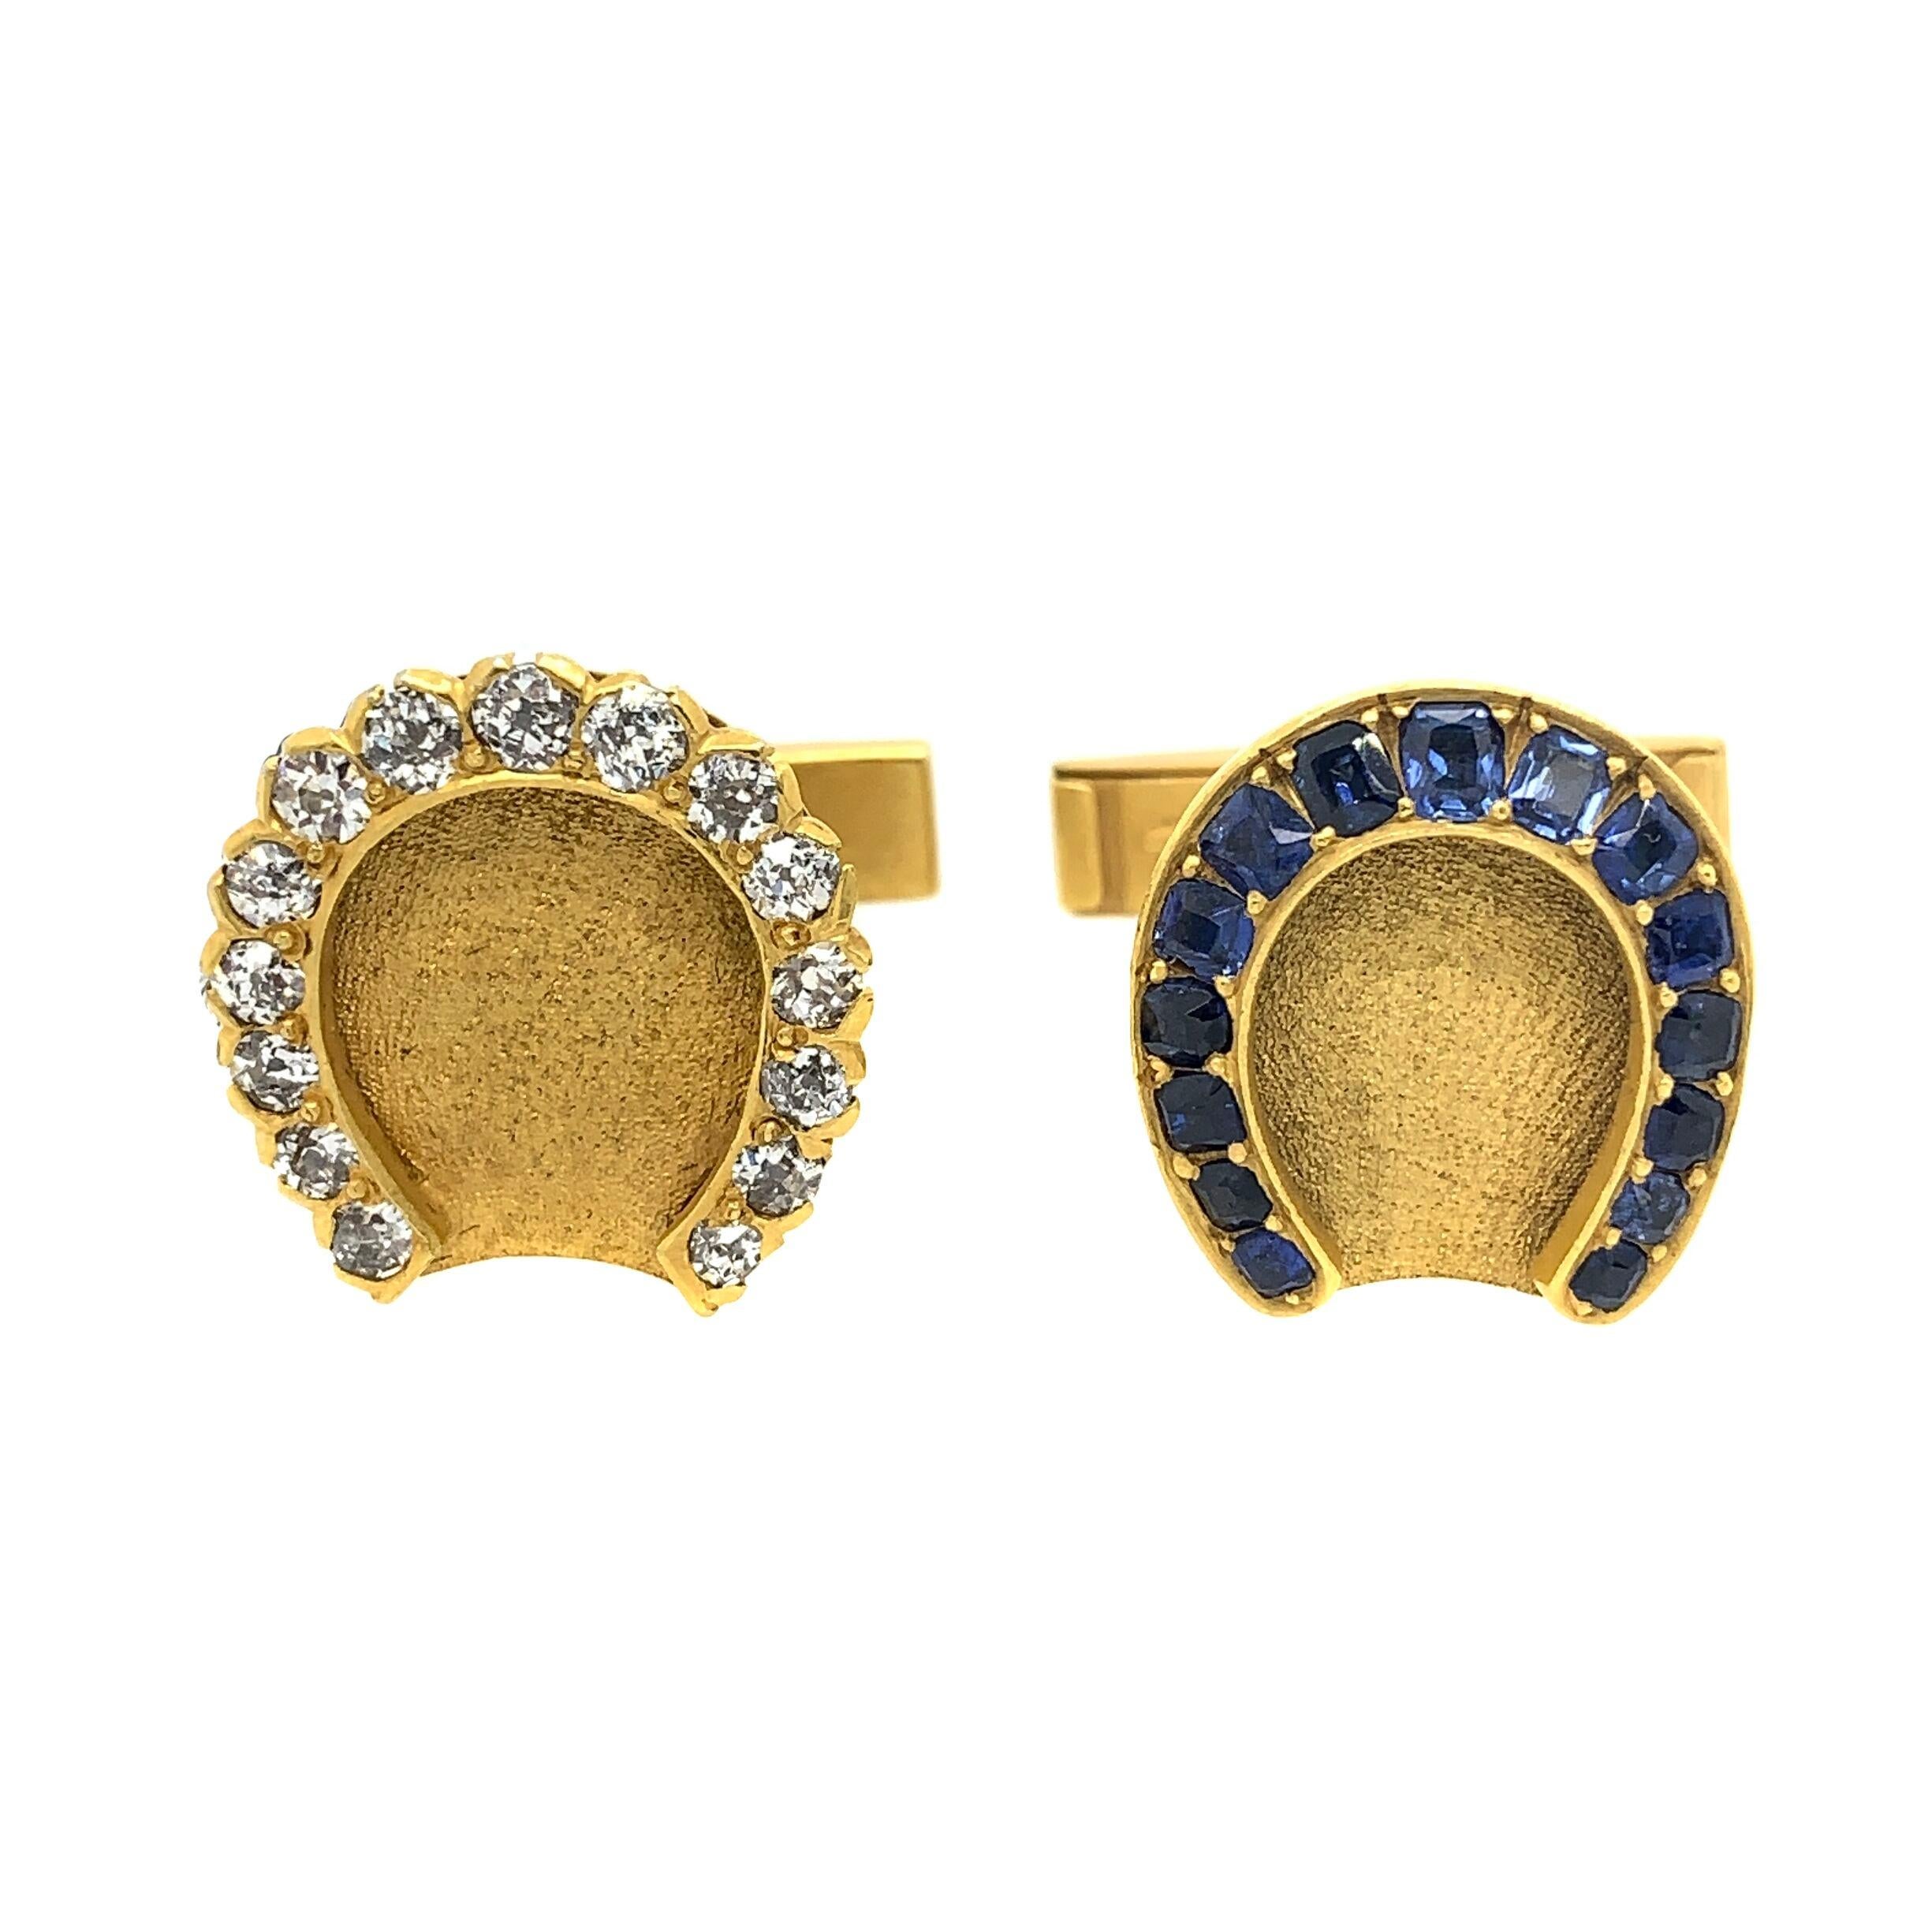 Metal: 14k Yellow Gold
Condition: Excellent
Gemstone: Blue Old Cut Diamonds, Blue Sapphires
Total Item weight: 11.4 g